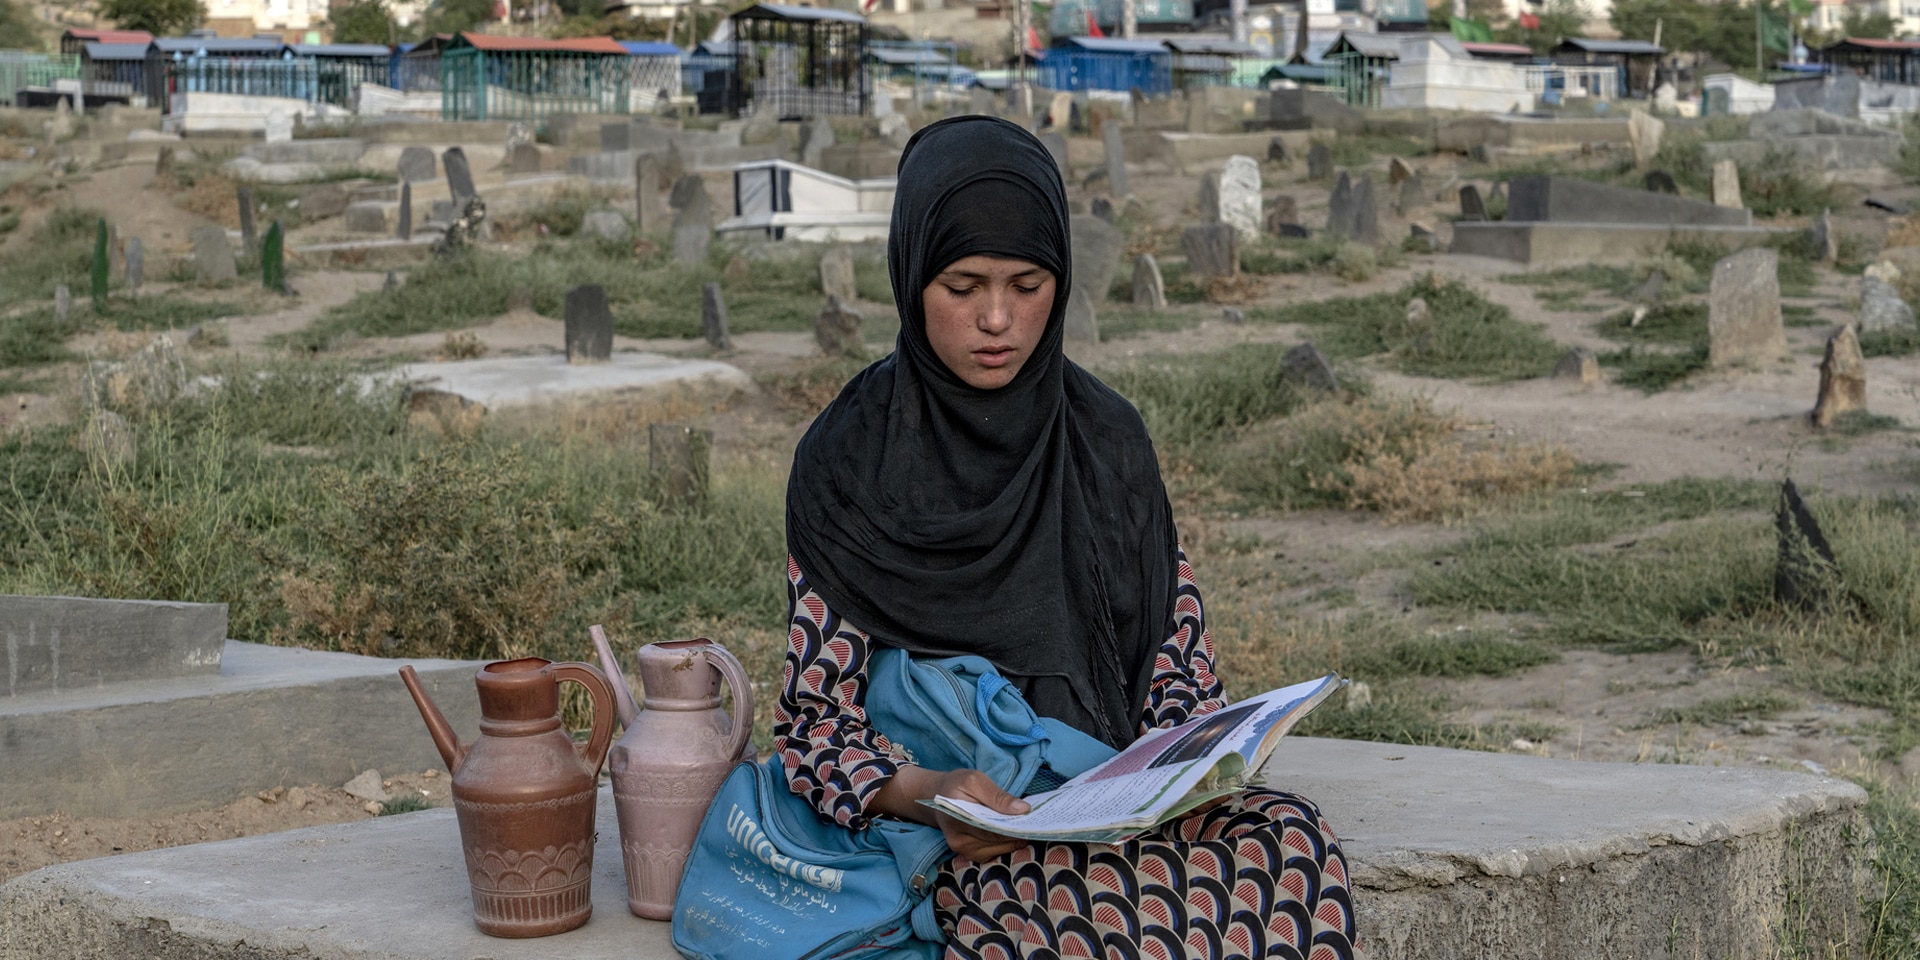 A girl sitting on a stone reading a book with a UN Women bag next to her. A number of ordinary-looking flats in the background.